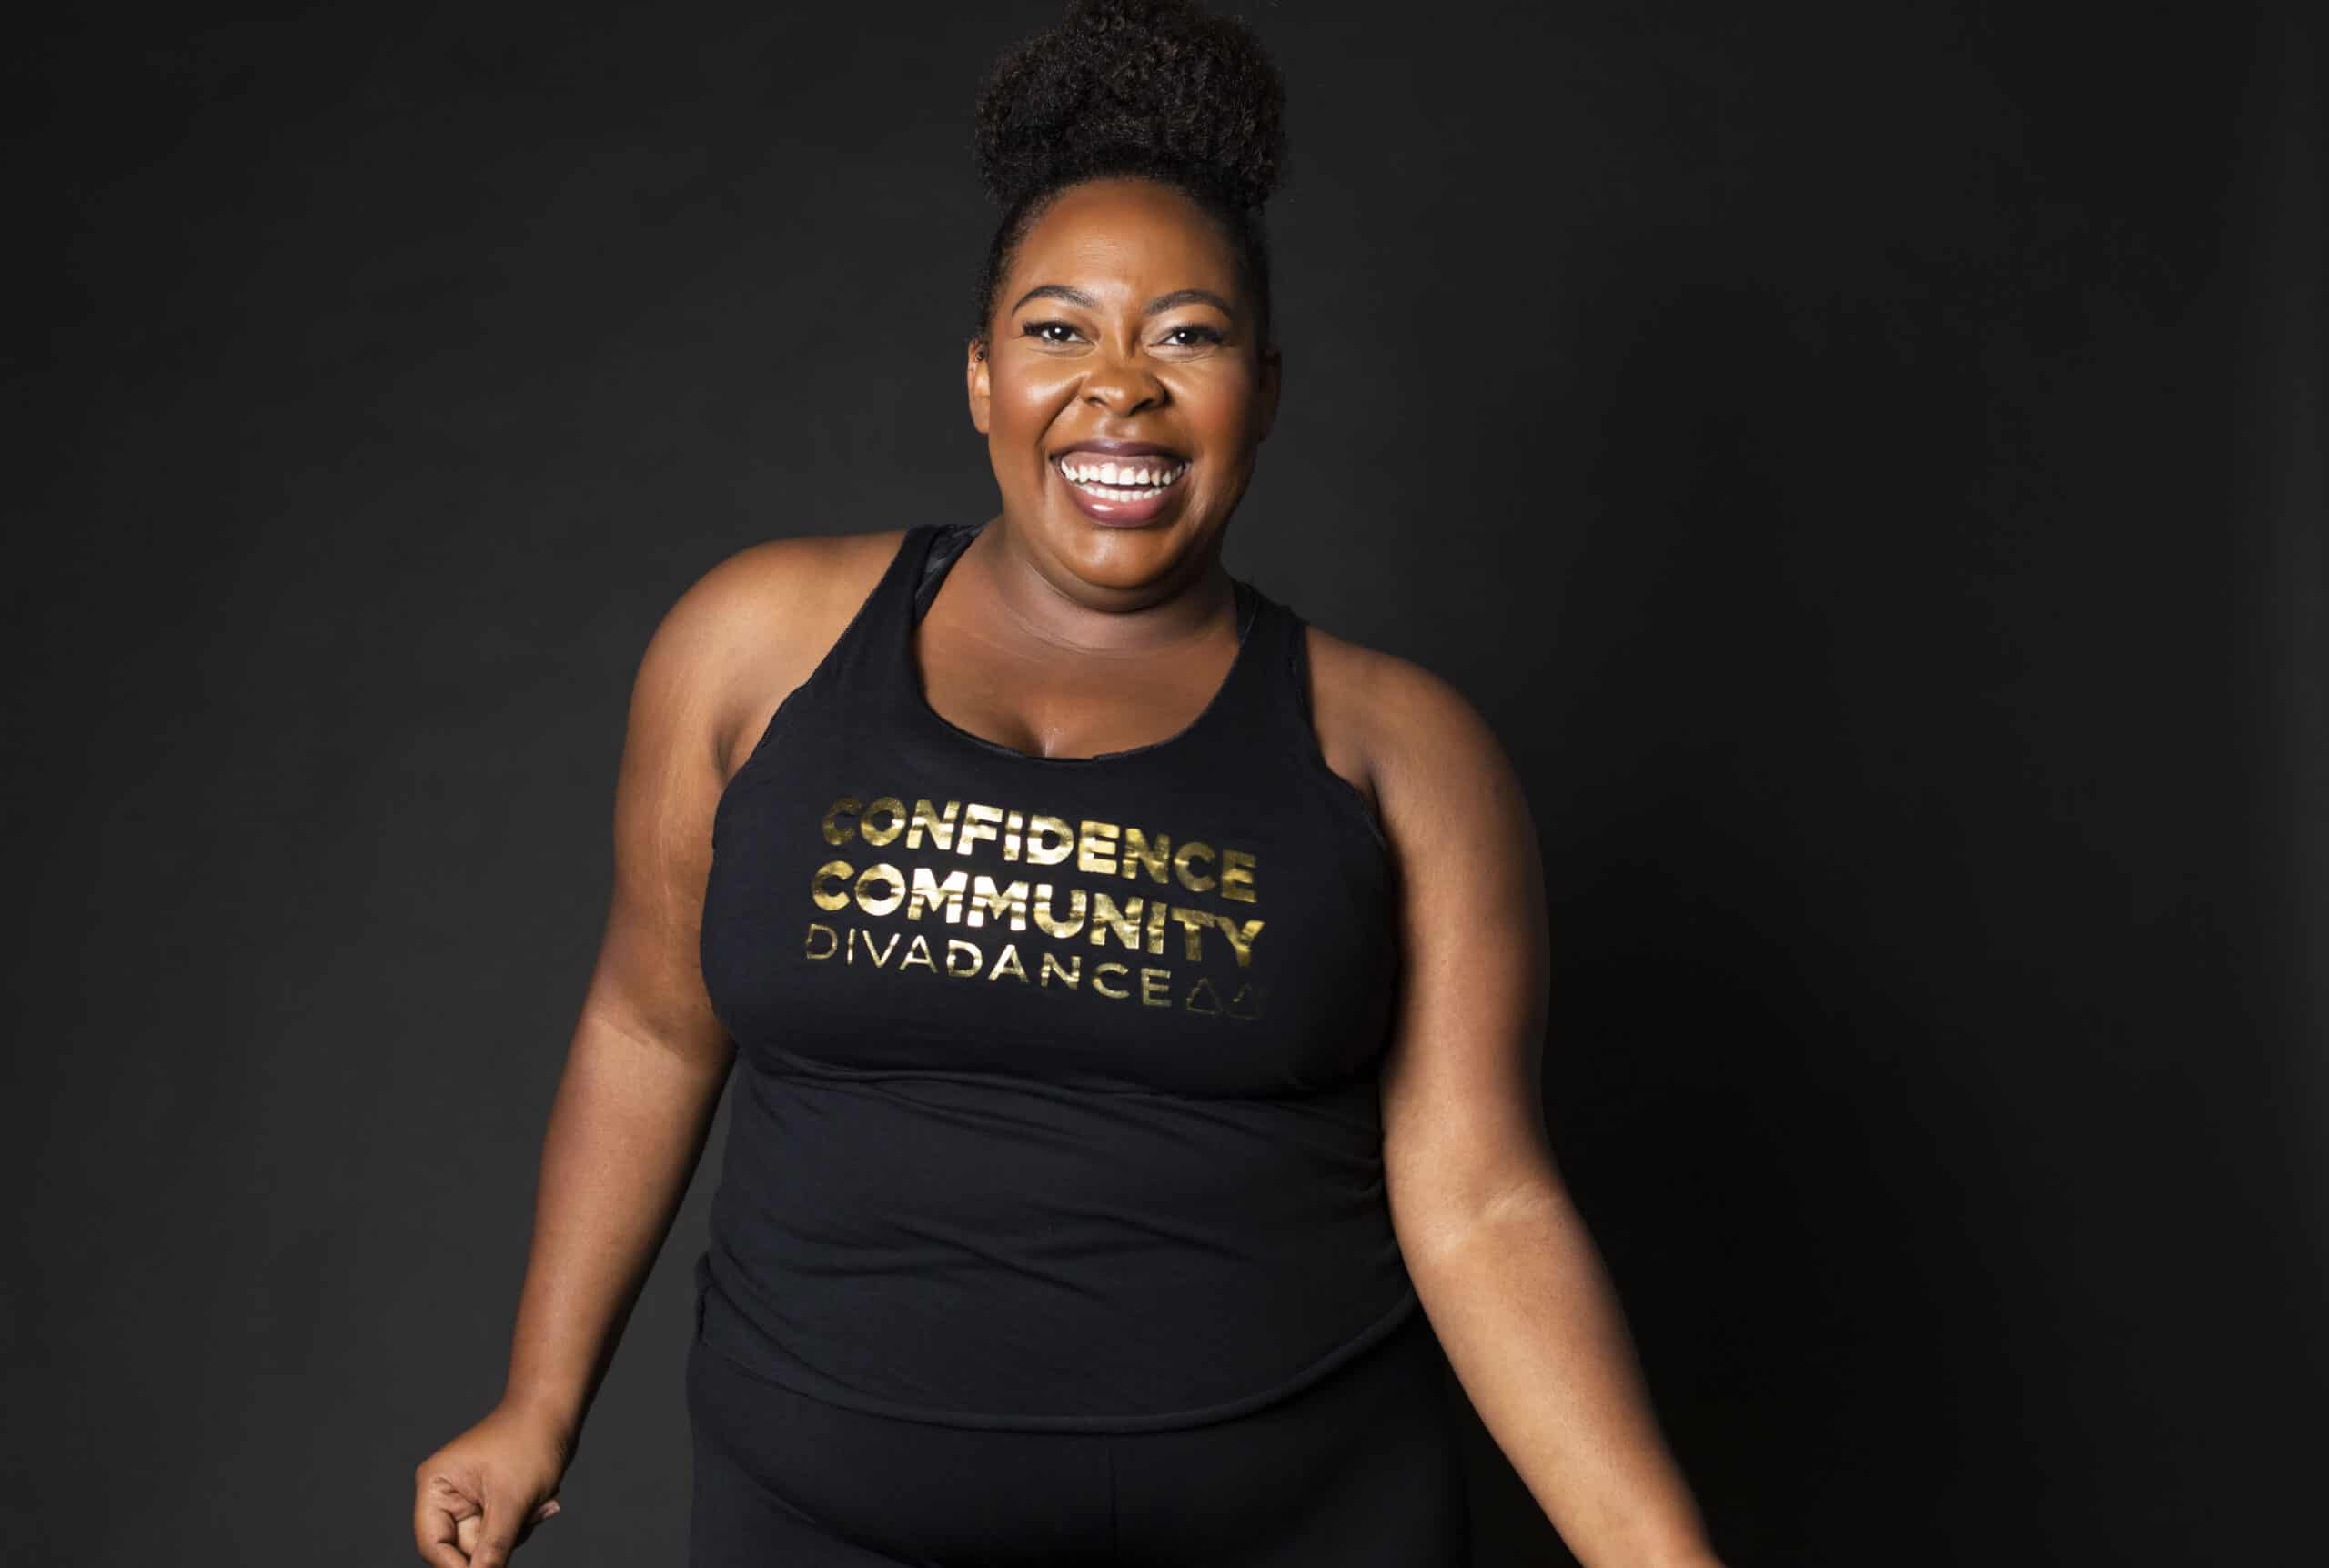 African-American-Woman-Smiling-At-Camera-With-DivaDance-Shirt